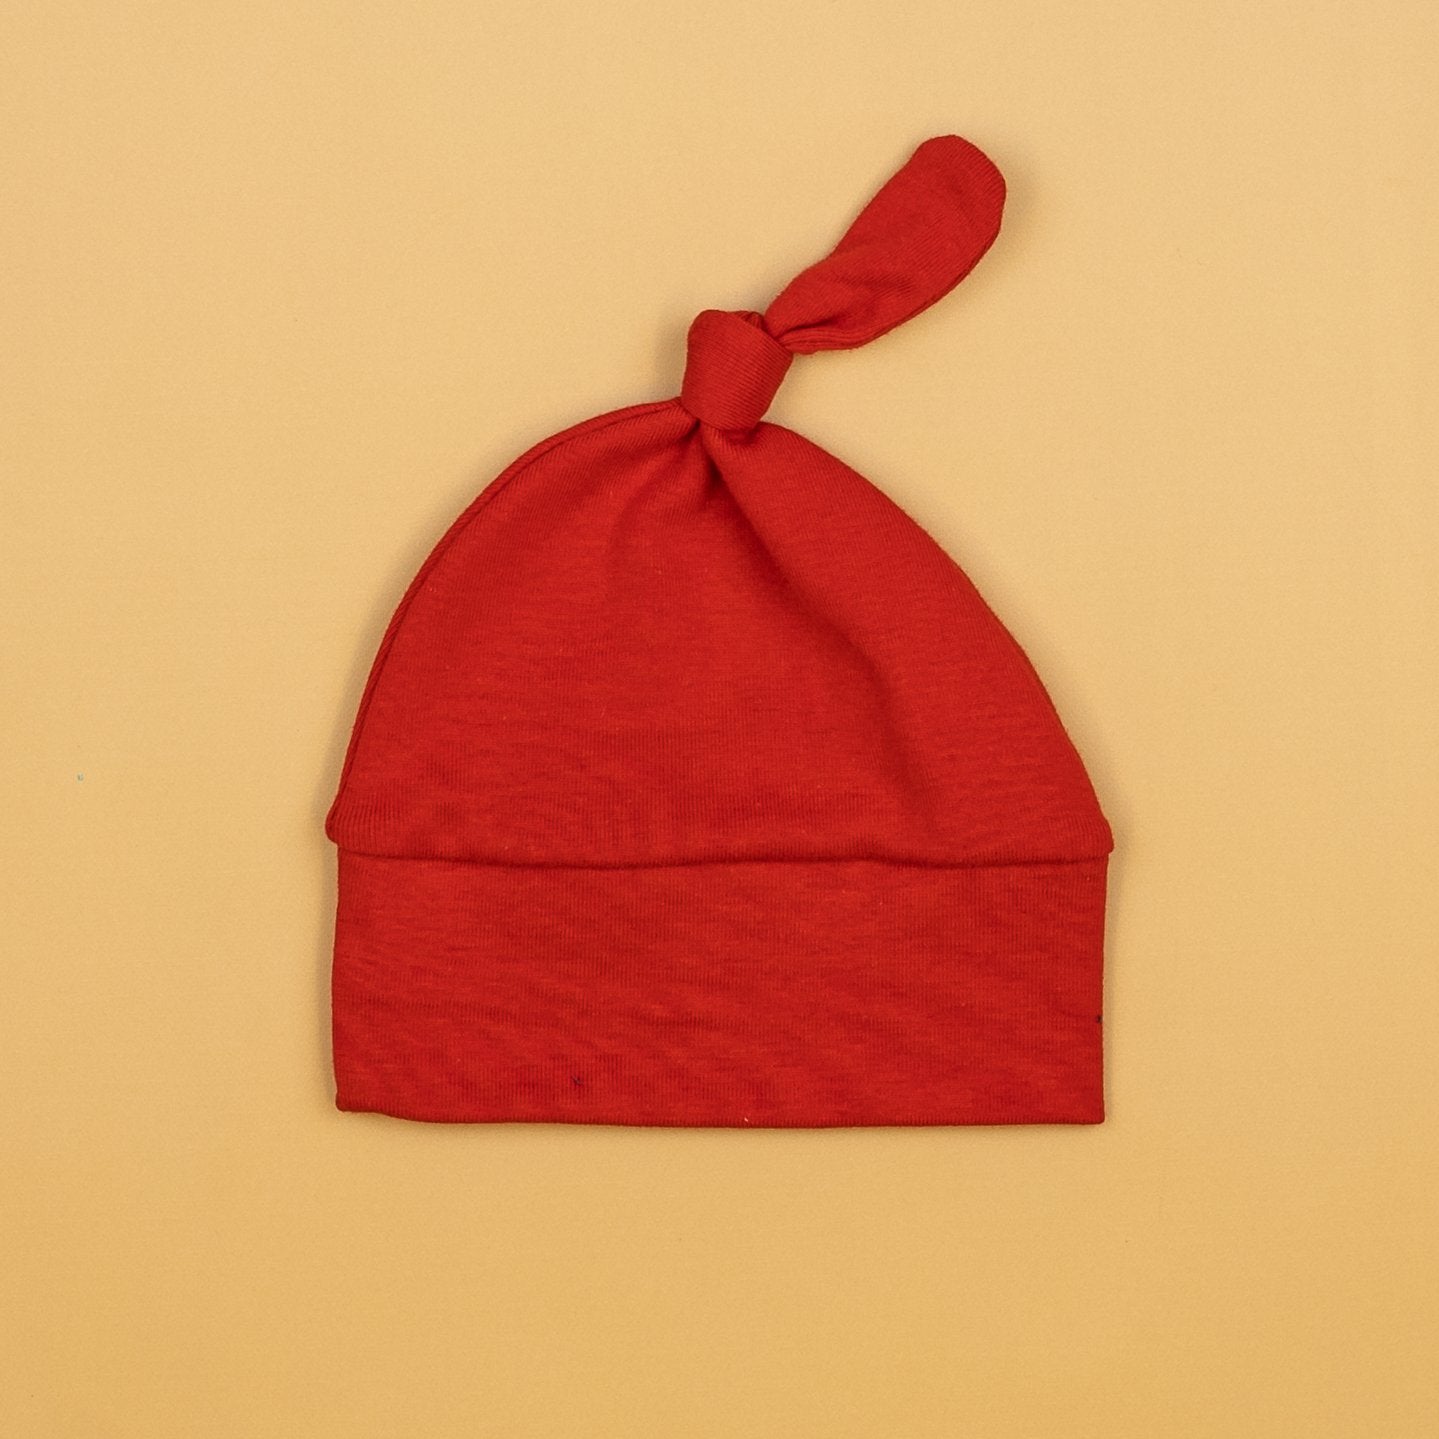 Cuddle Sleep Dream Knot Hat Red Knot Hat